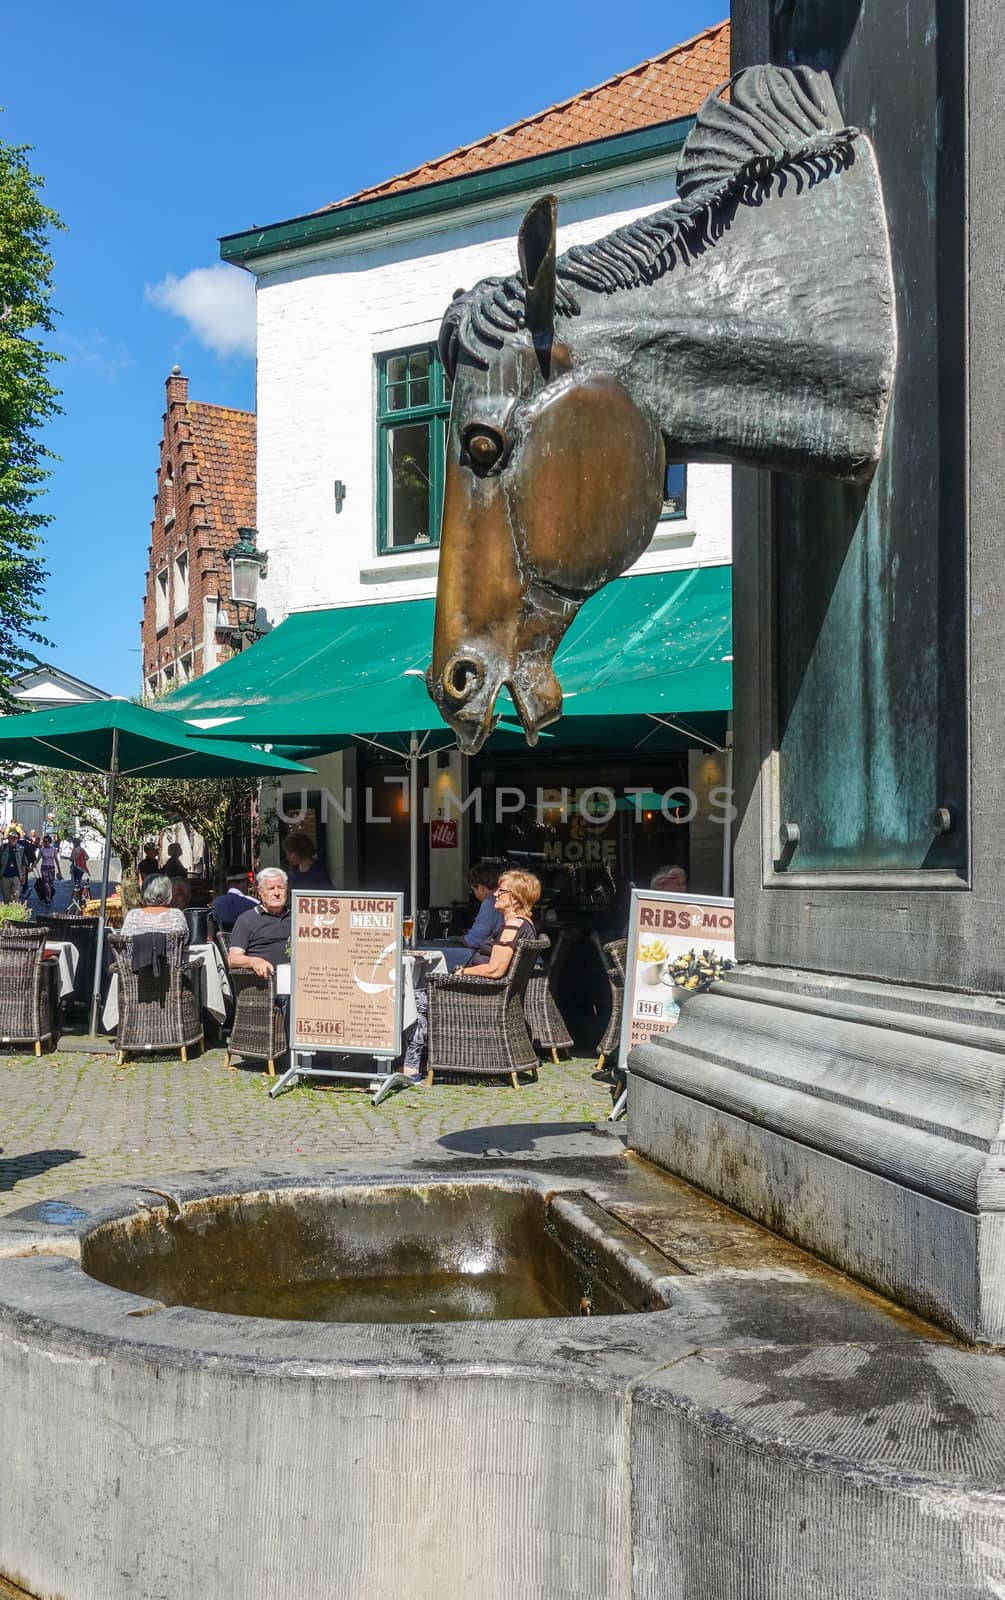 Water pump for horses of carriages in Bruges, Flanders, Belgium. by Claudine